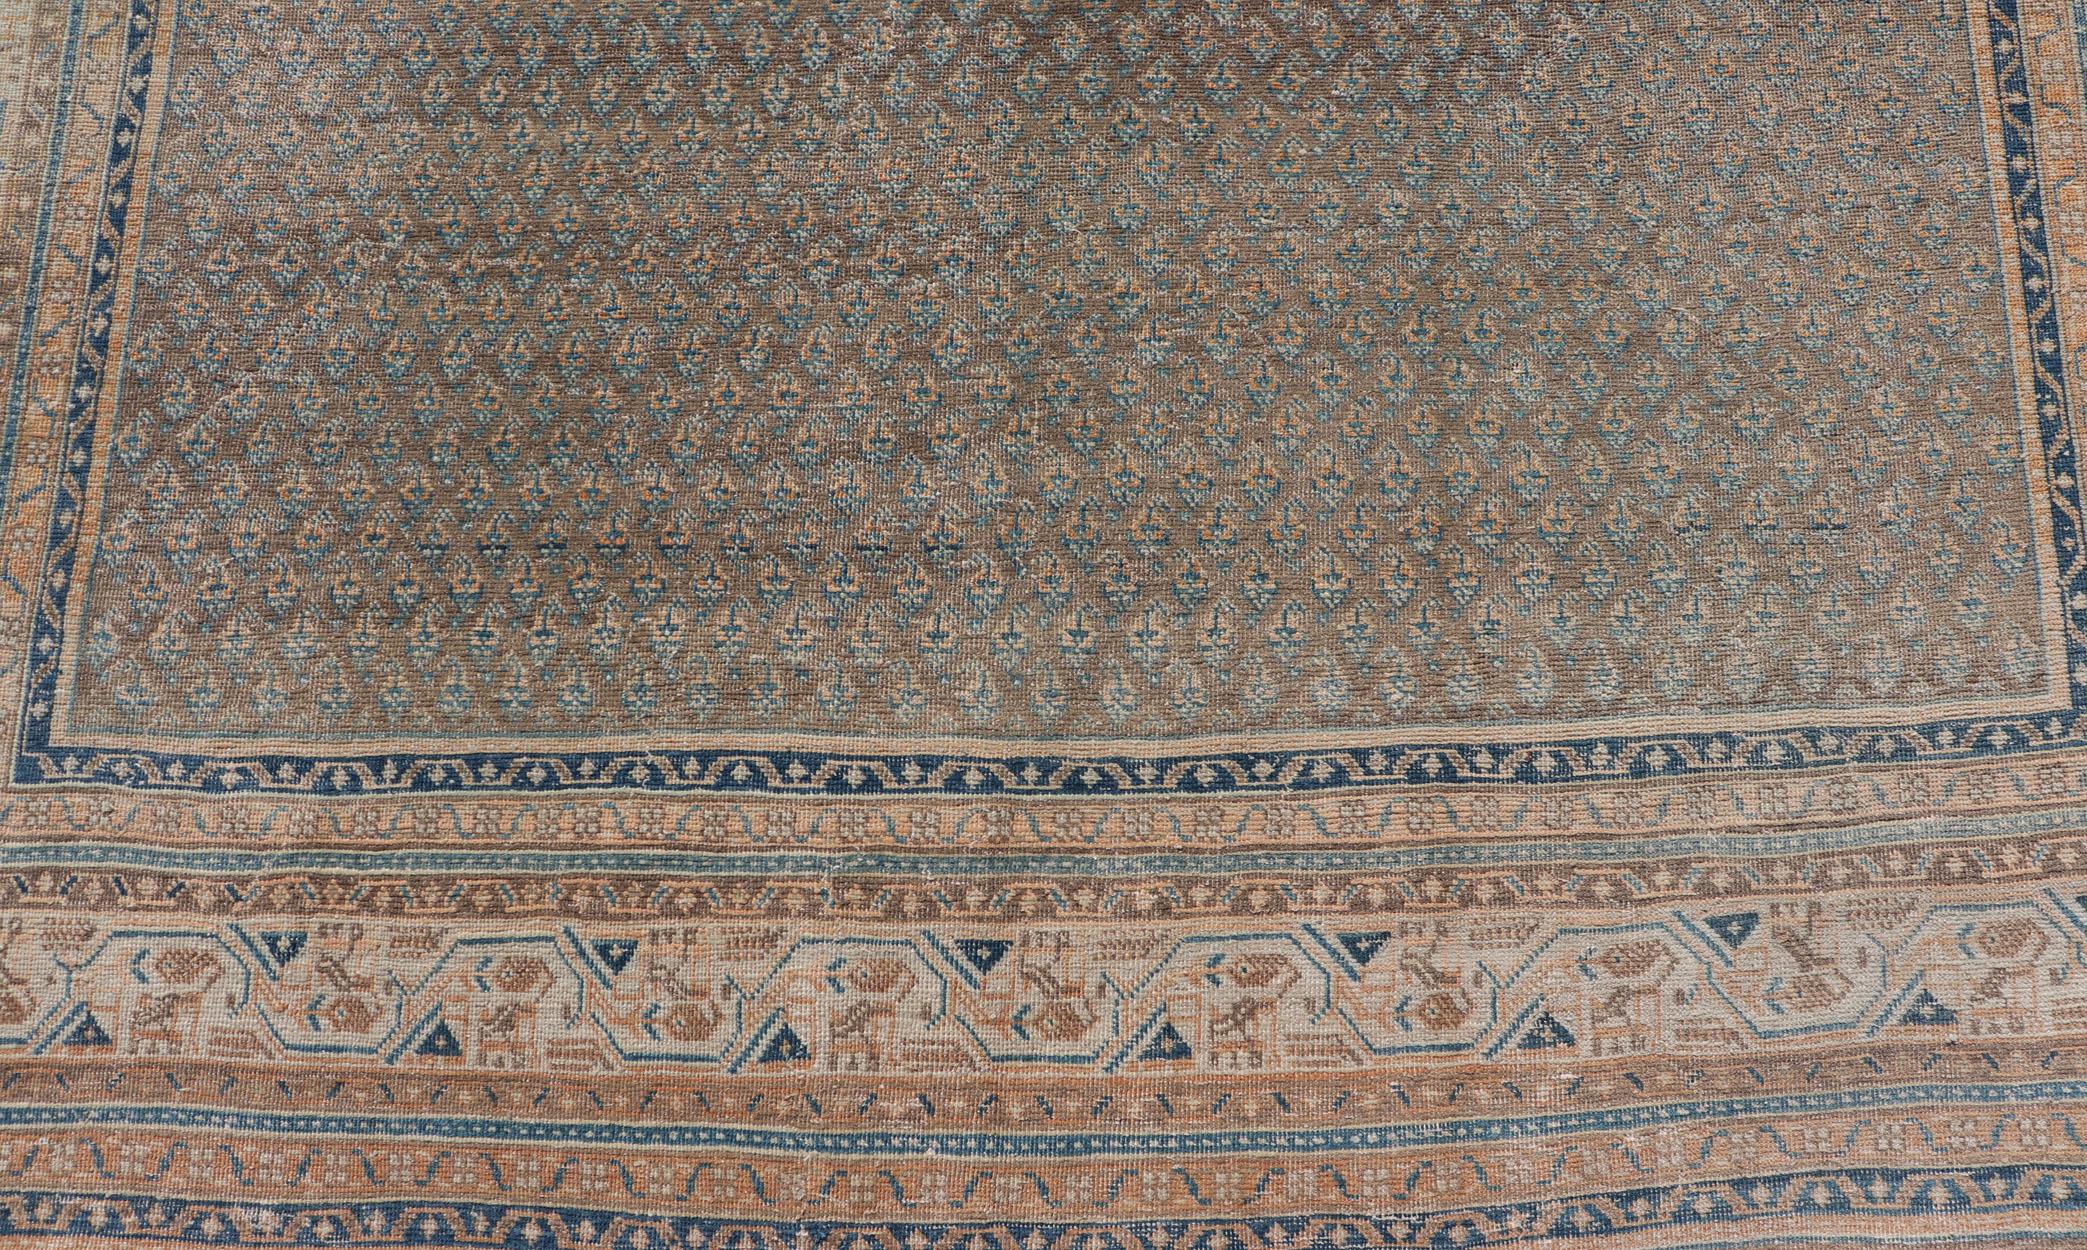 Wool Persian Tabriz Rug with All-Over Saraband Design in Brown and Blue